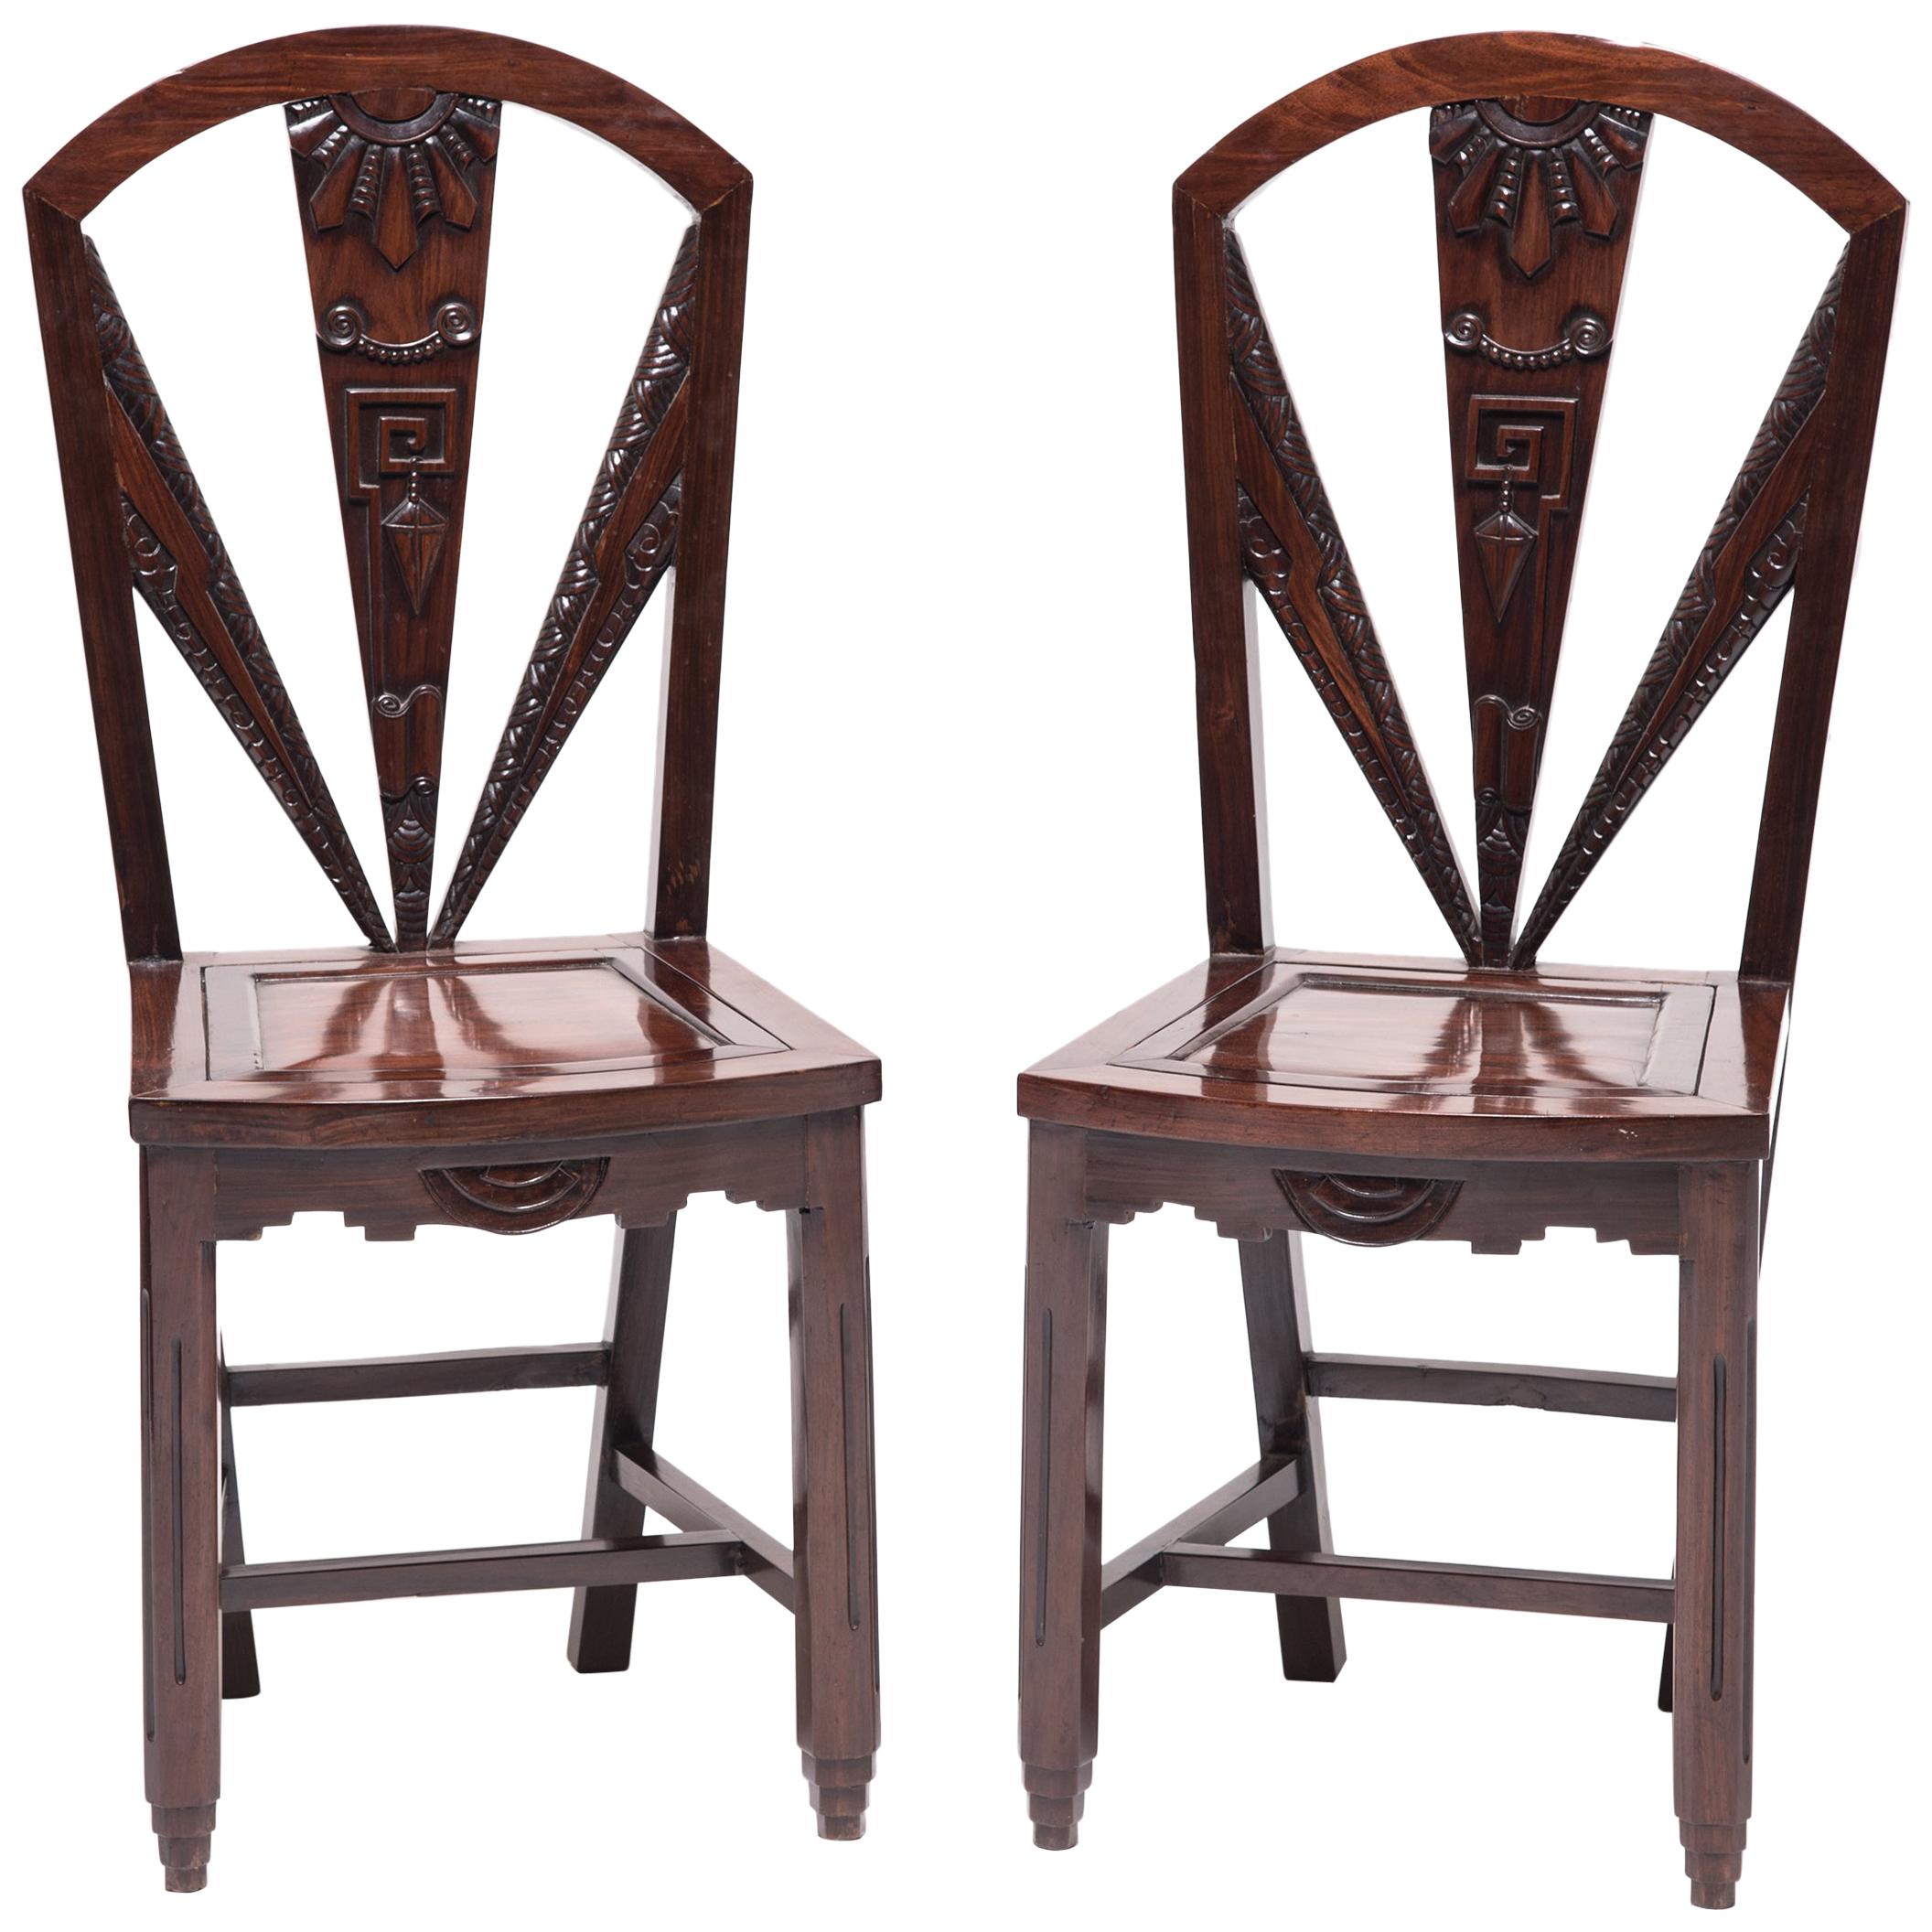 Pair of Chinese Art Deco Geometric Side Chairs, c. 1920